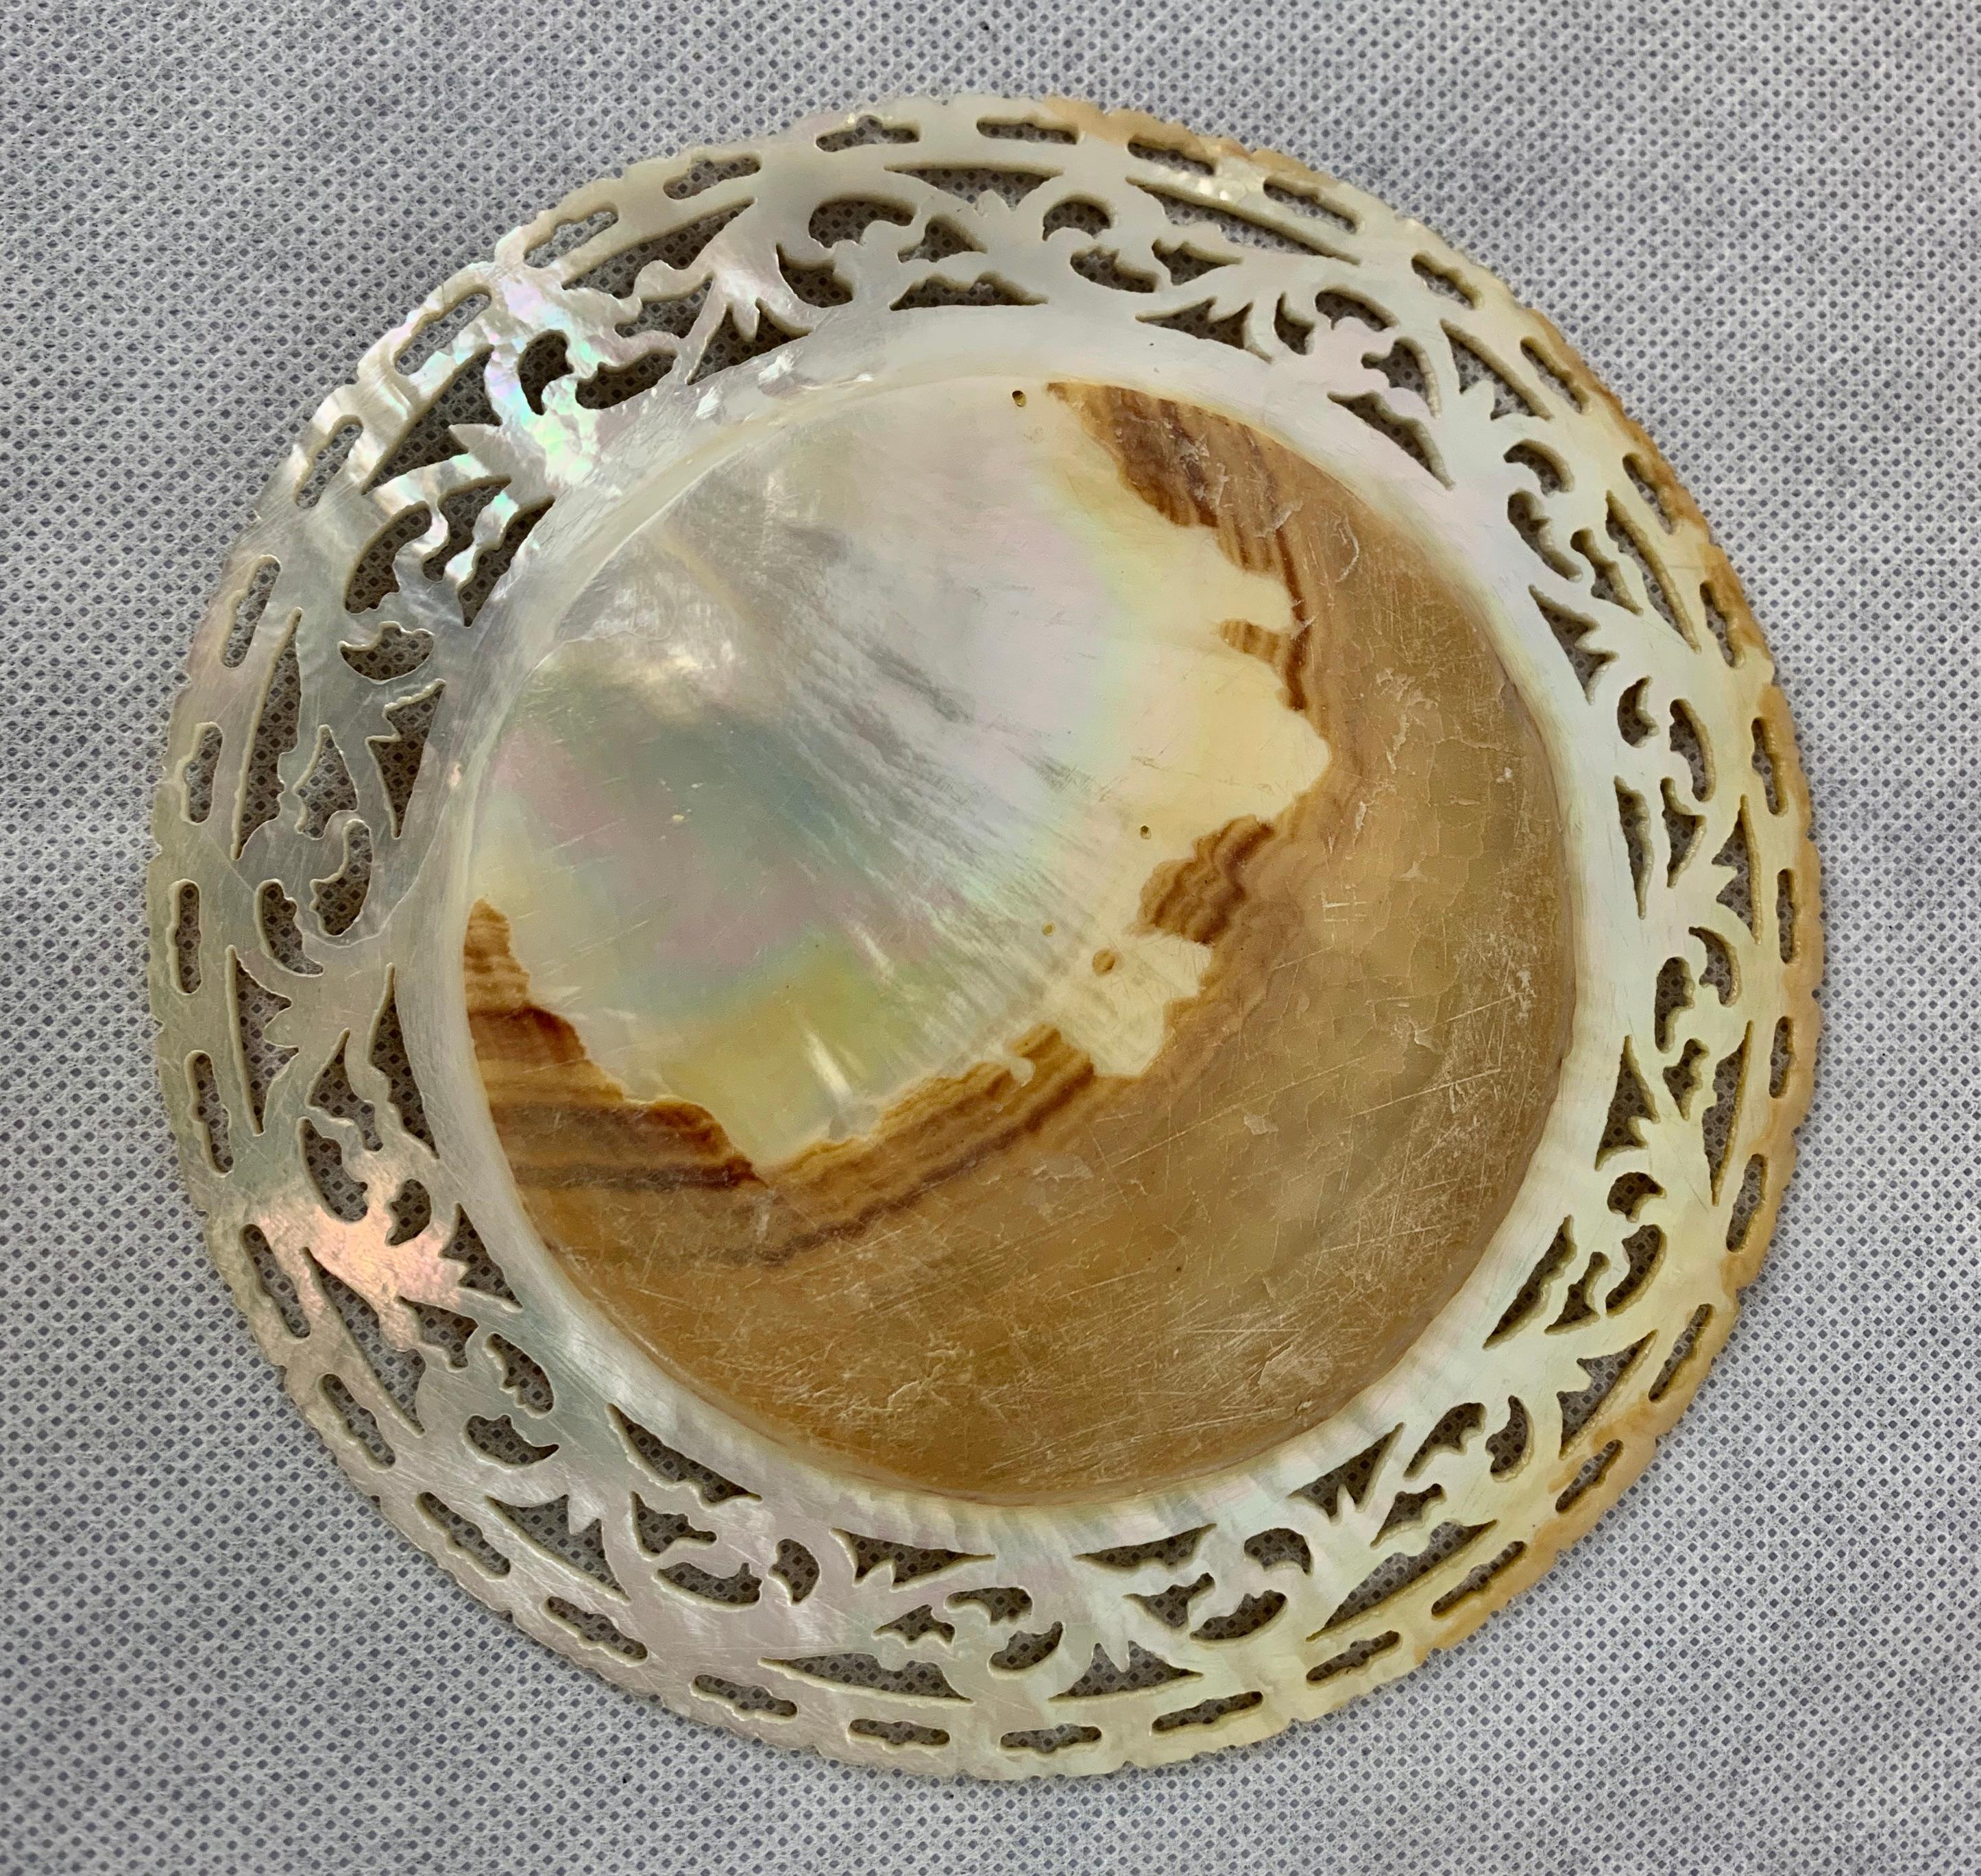 Hand-Carved   Reticulated and Carved Mother of Pearl Caviar Dish-China Trade Period 